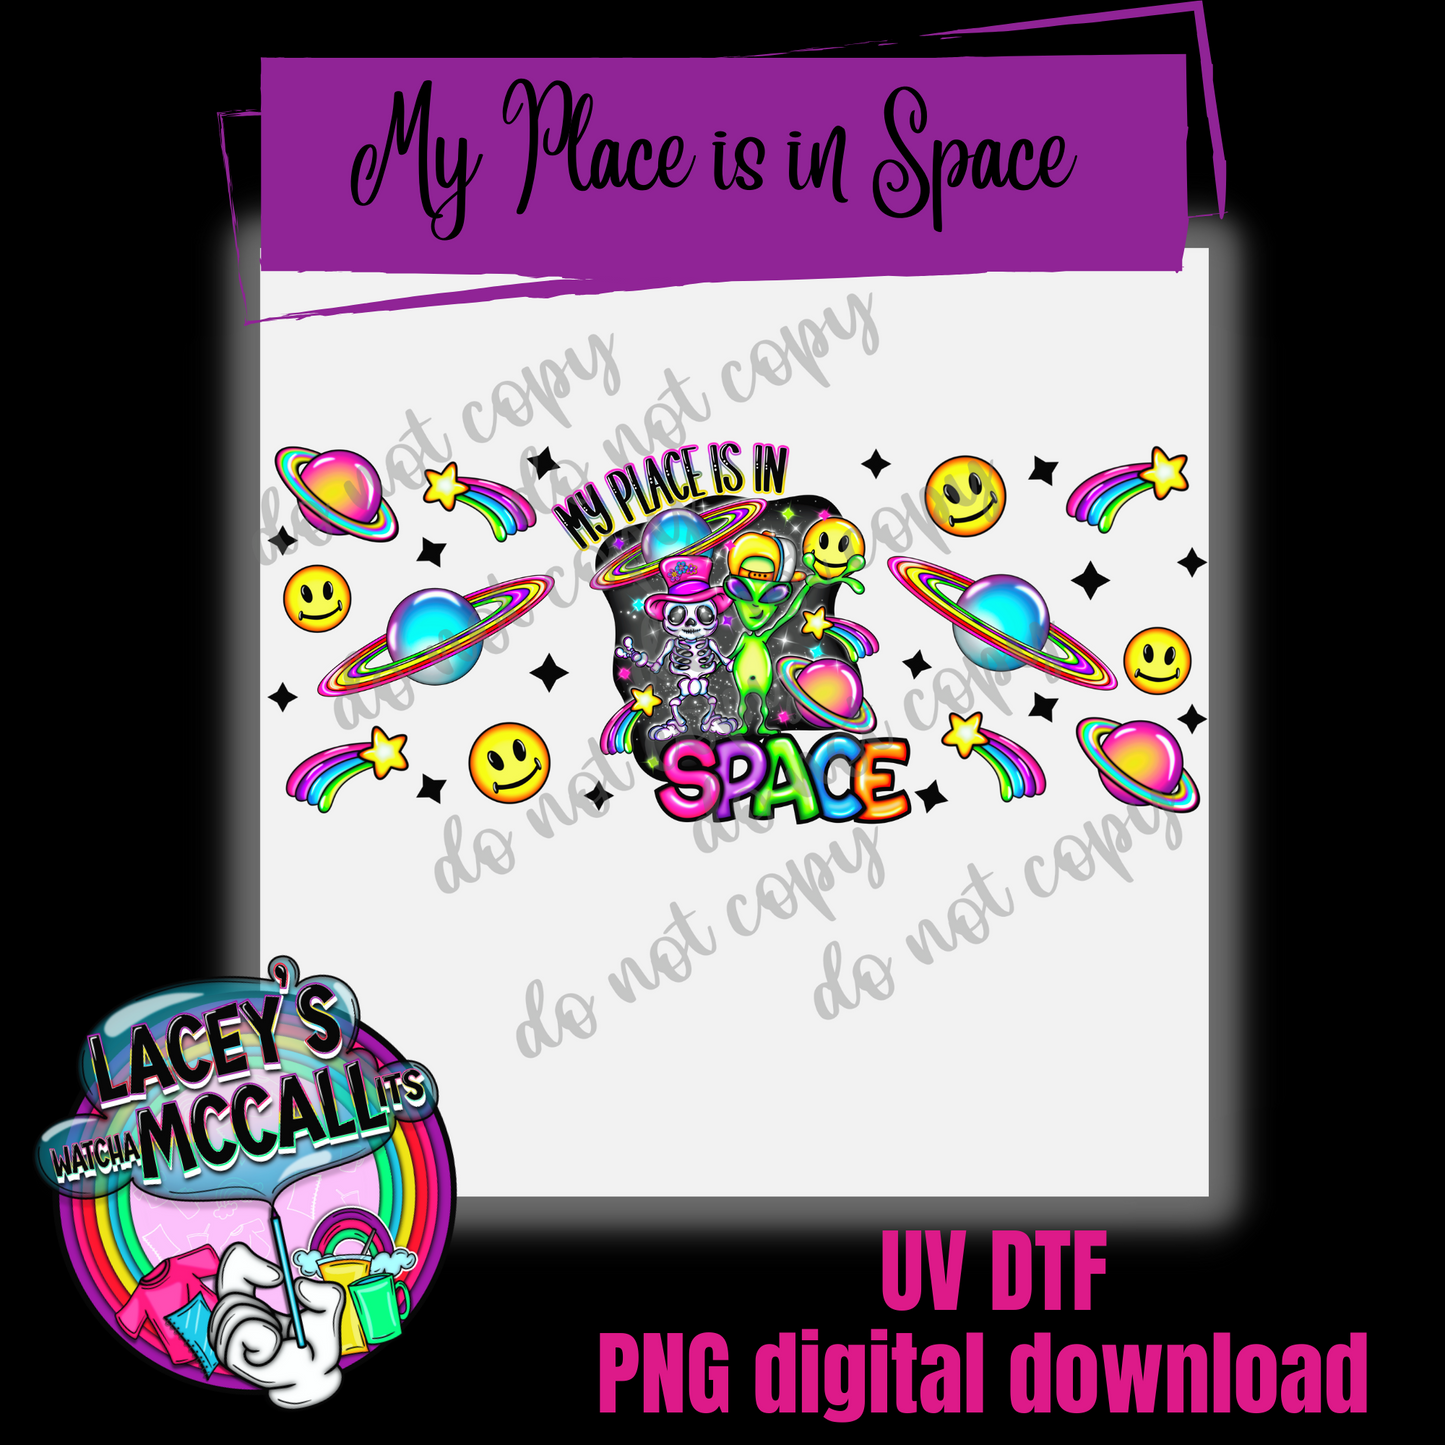 My Place is in Space UV DTF PNG